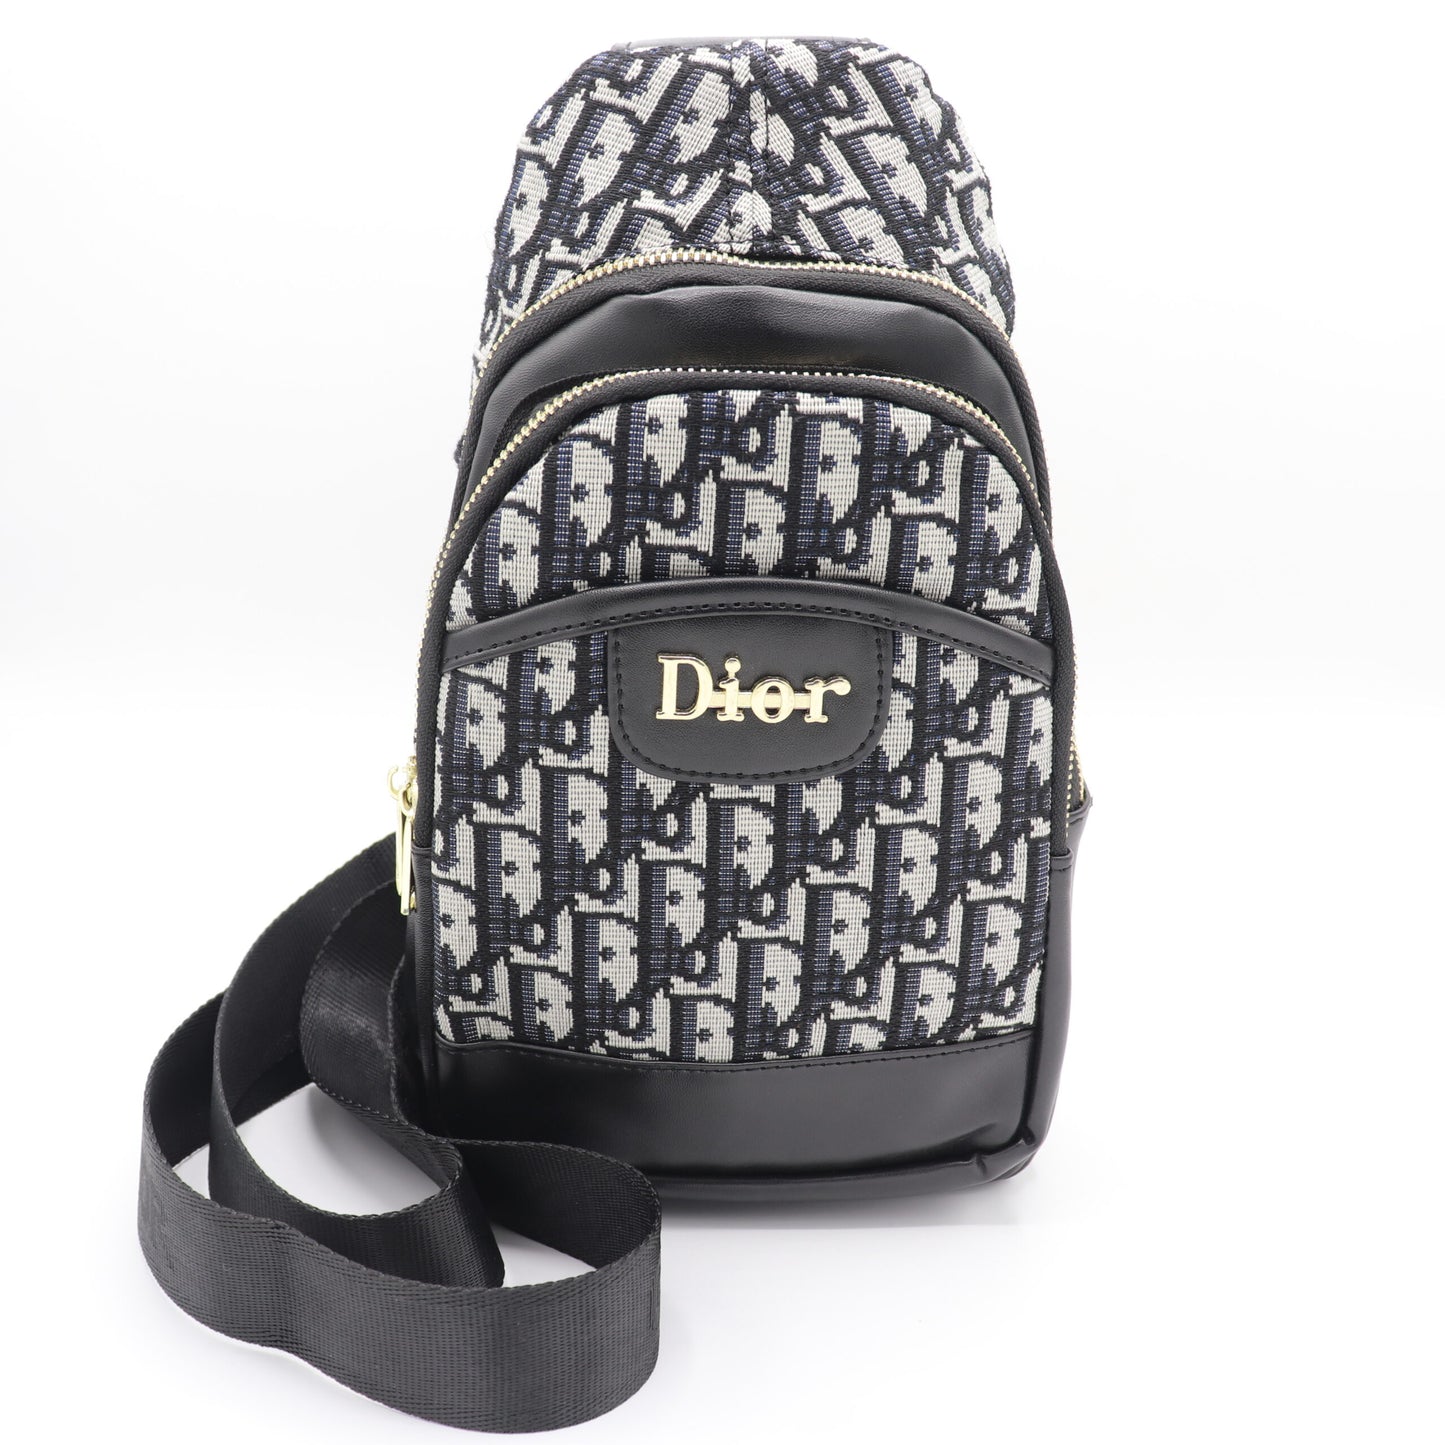 Deor | Imported | Cross | Body | Bag | DCB 1